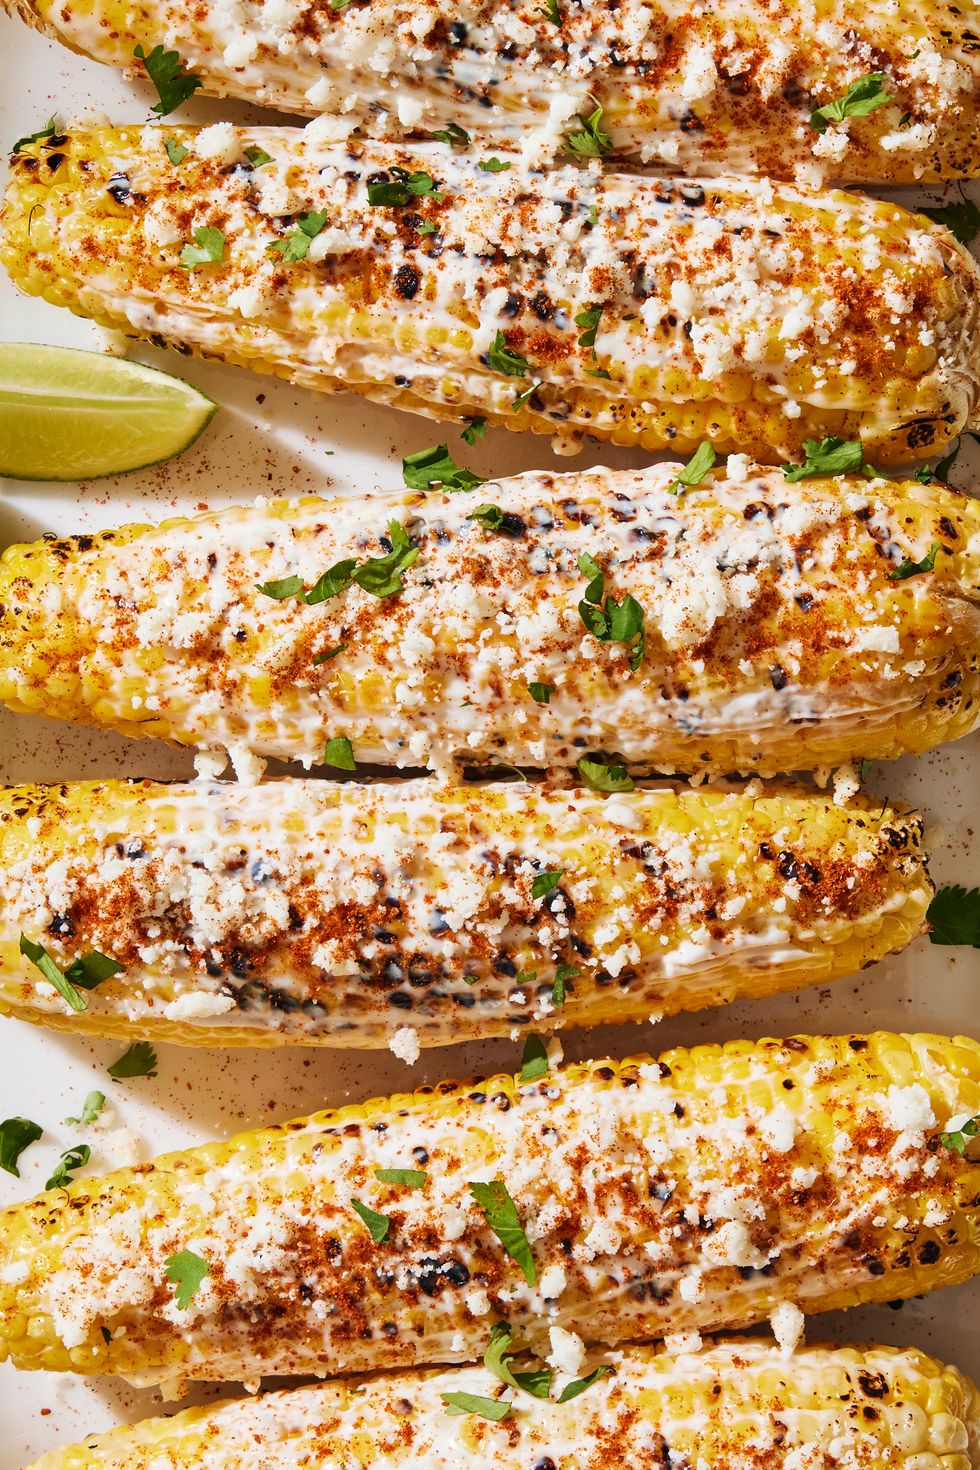 grilled corn topped with a creamy mixture, cotija cheese, chili powder, cilantro and lime